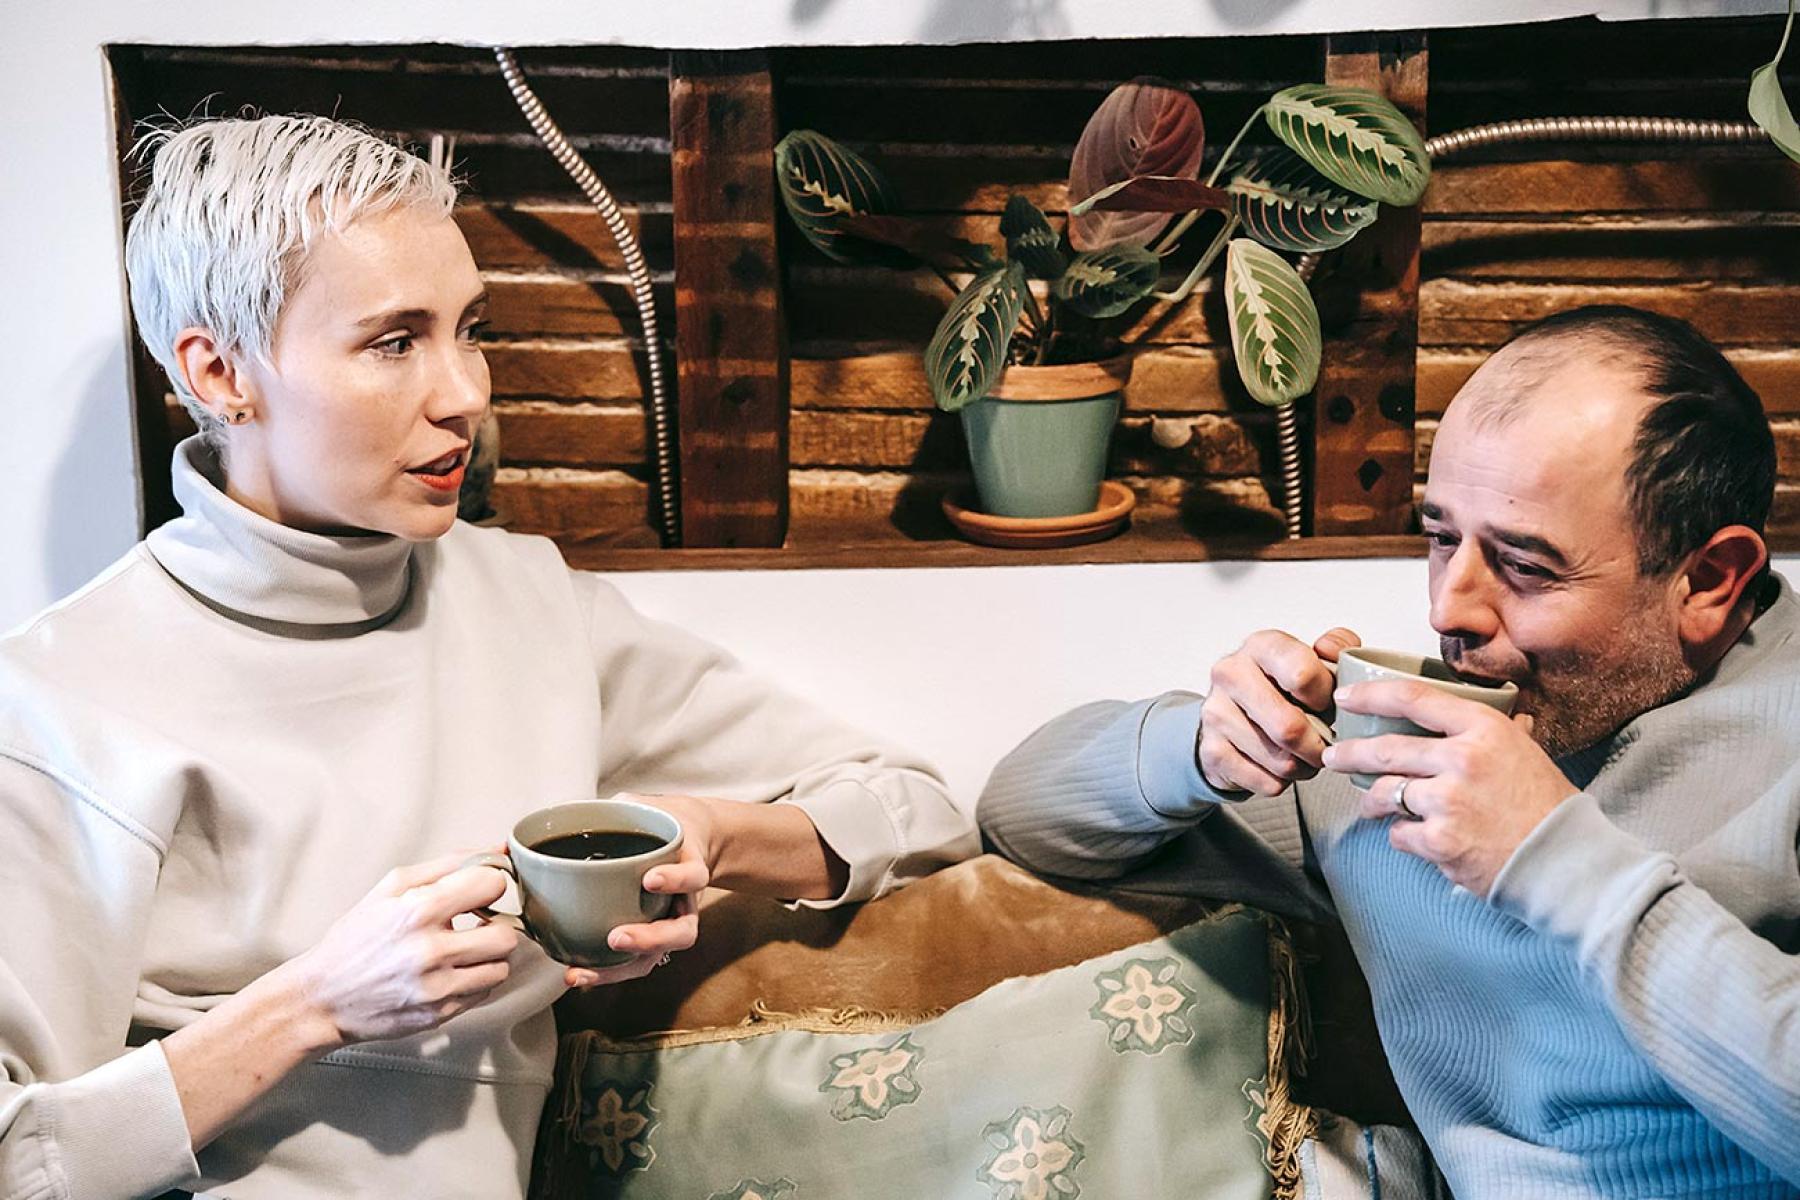 Woman and man in discussions over coffee